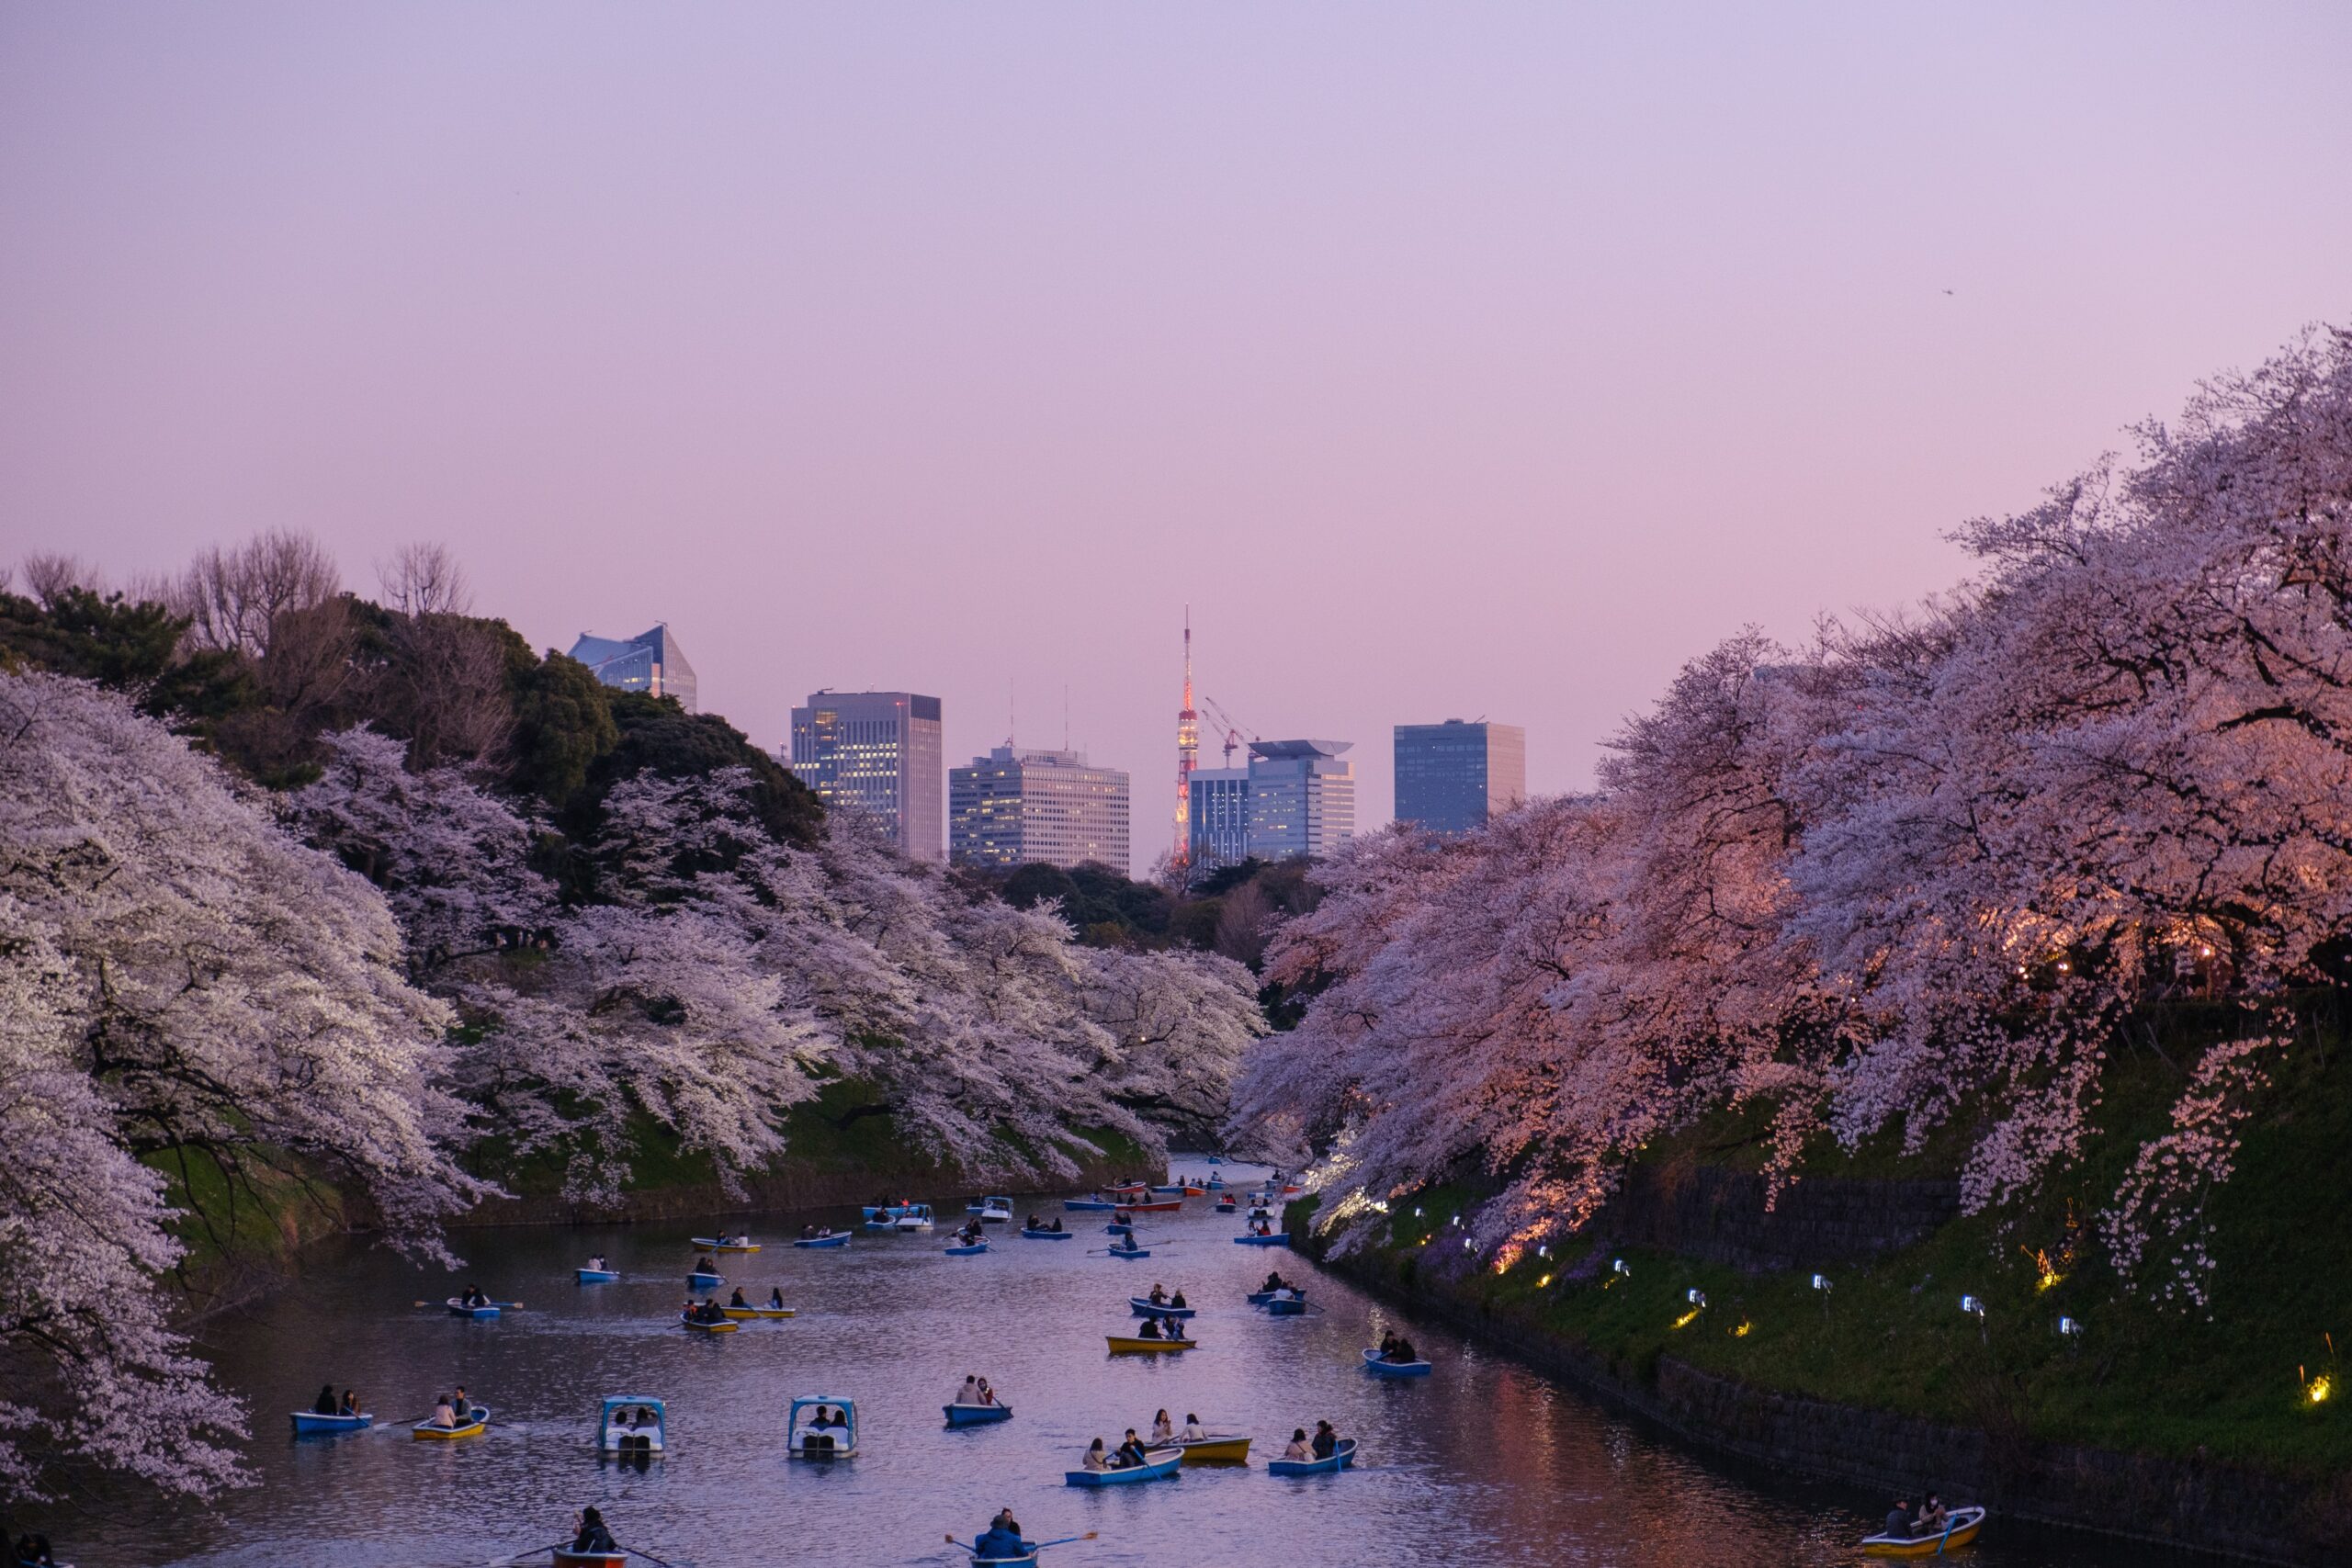 Tokyo, Japan is a great place to visit and see the mighty cherry blossom.
pictured: Ueno Park's Shinobazu Pond, which is filled with people canoeing and viewing the cherry blossom trres that line the water